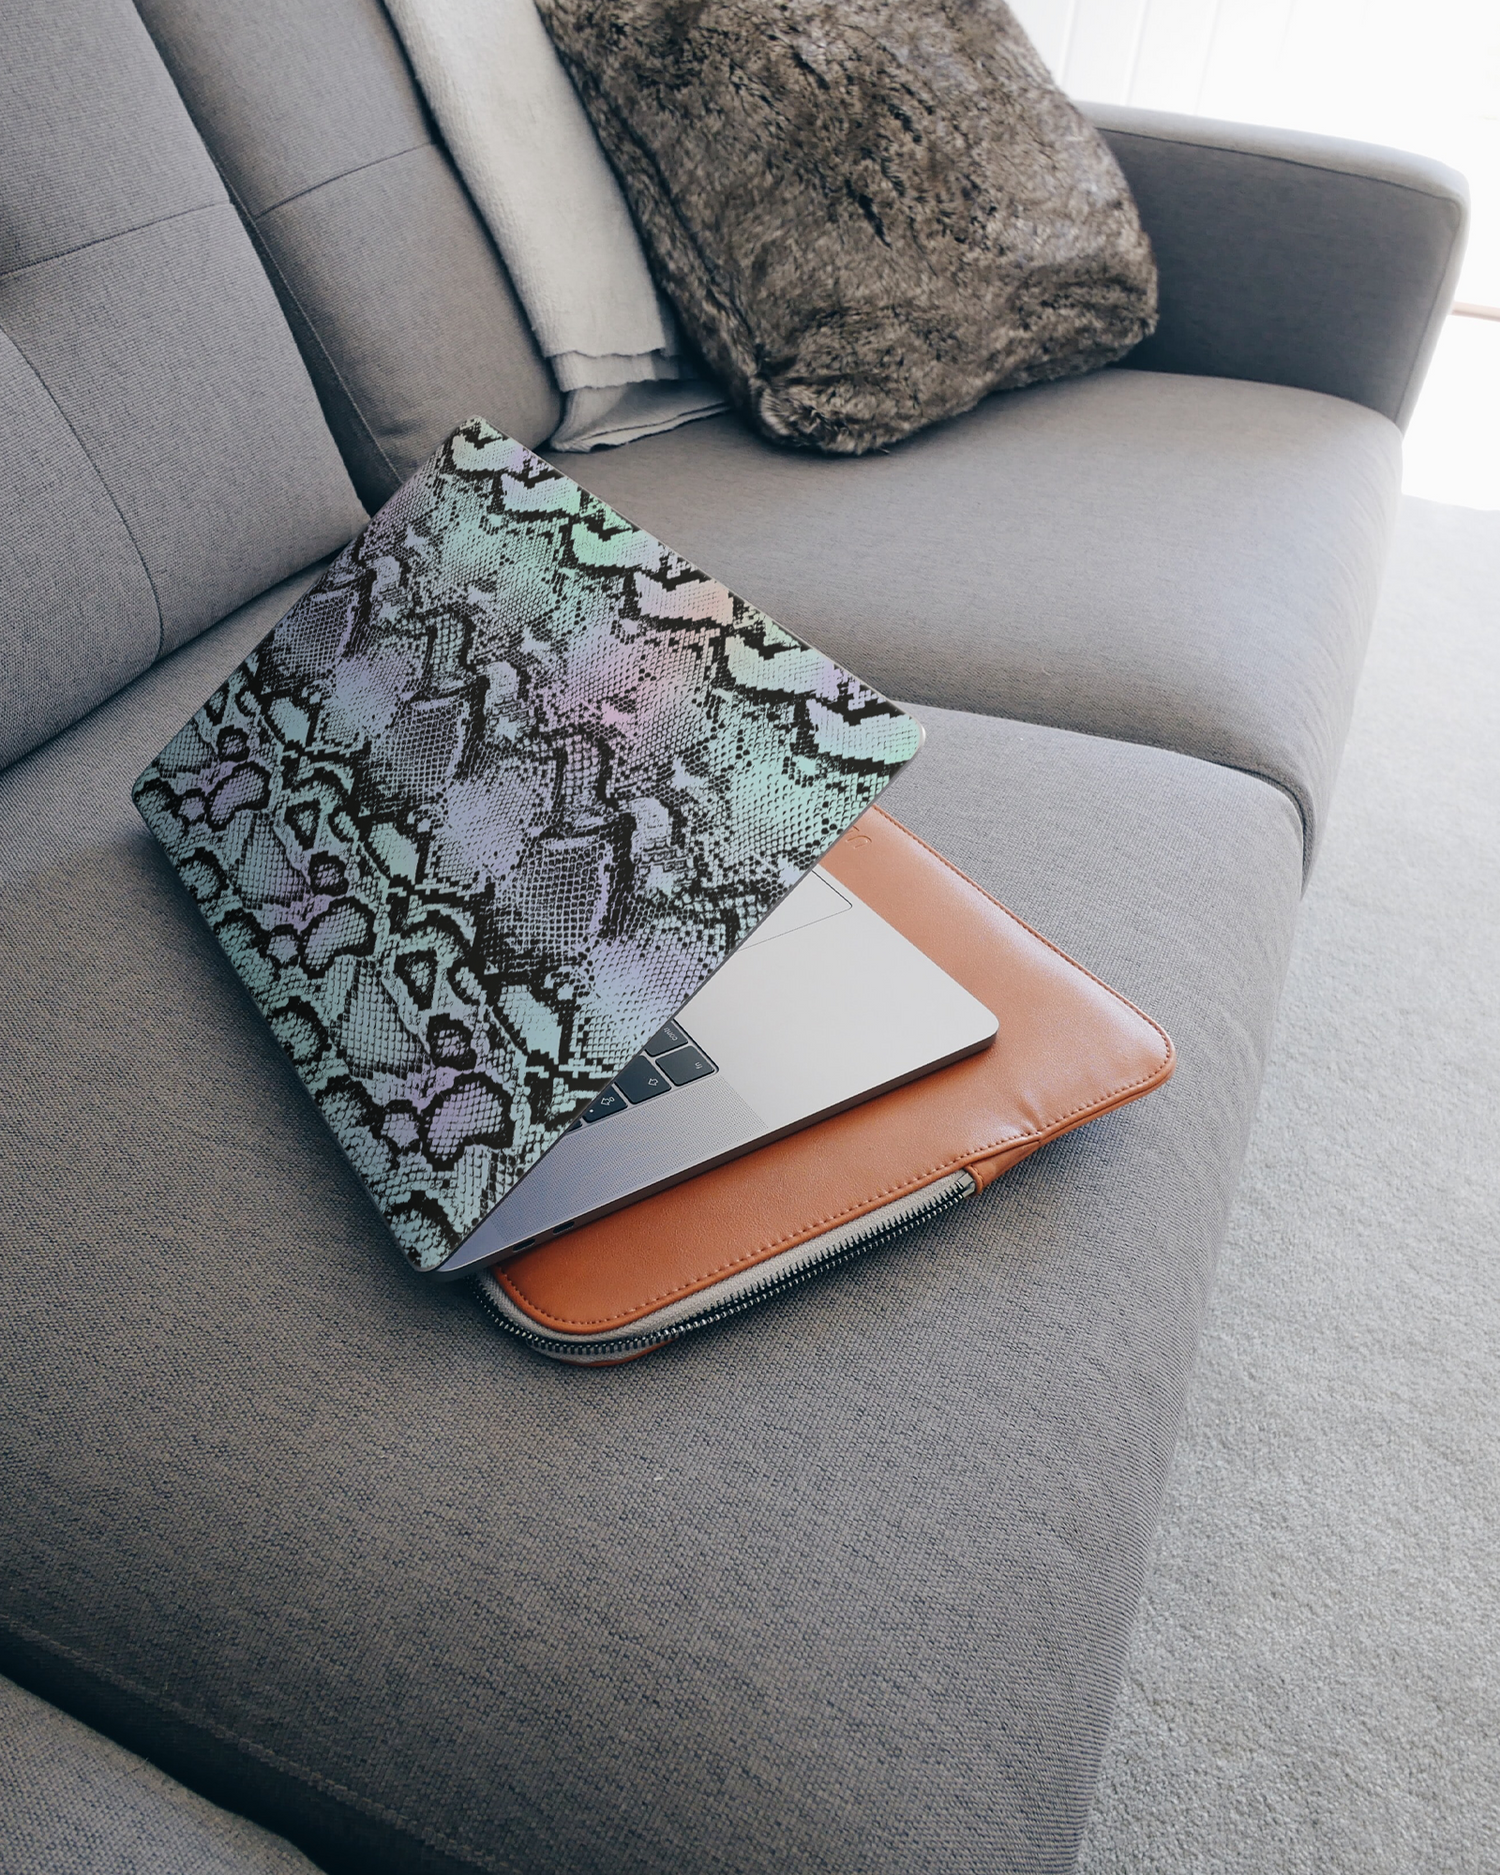 Groovy Snakeskin Laptop Skin for 15 inch Apple MacBooks on a couch